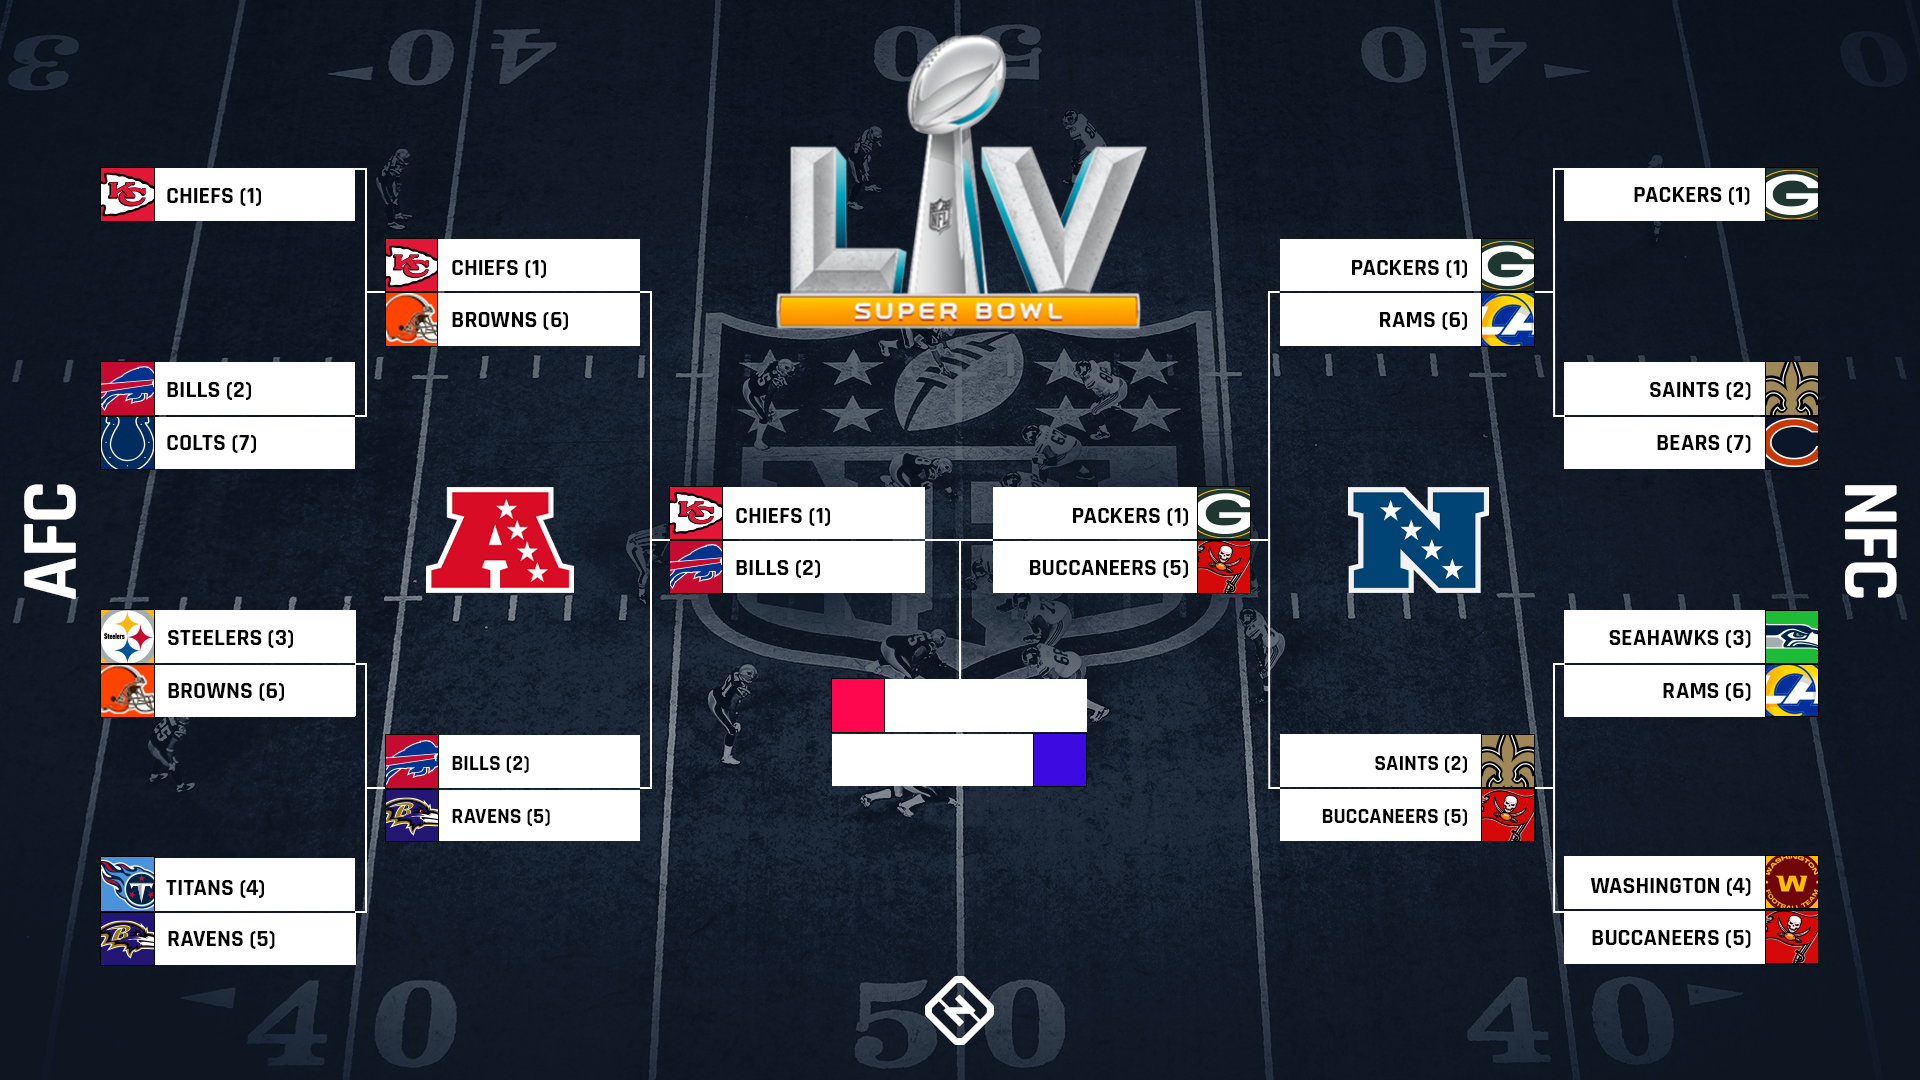 NFL playoff schedule 2021: Updated bracket & TV channels for AFC, NFC